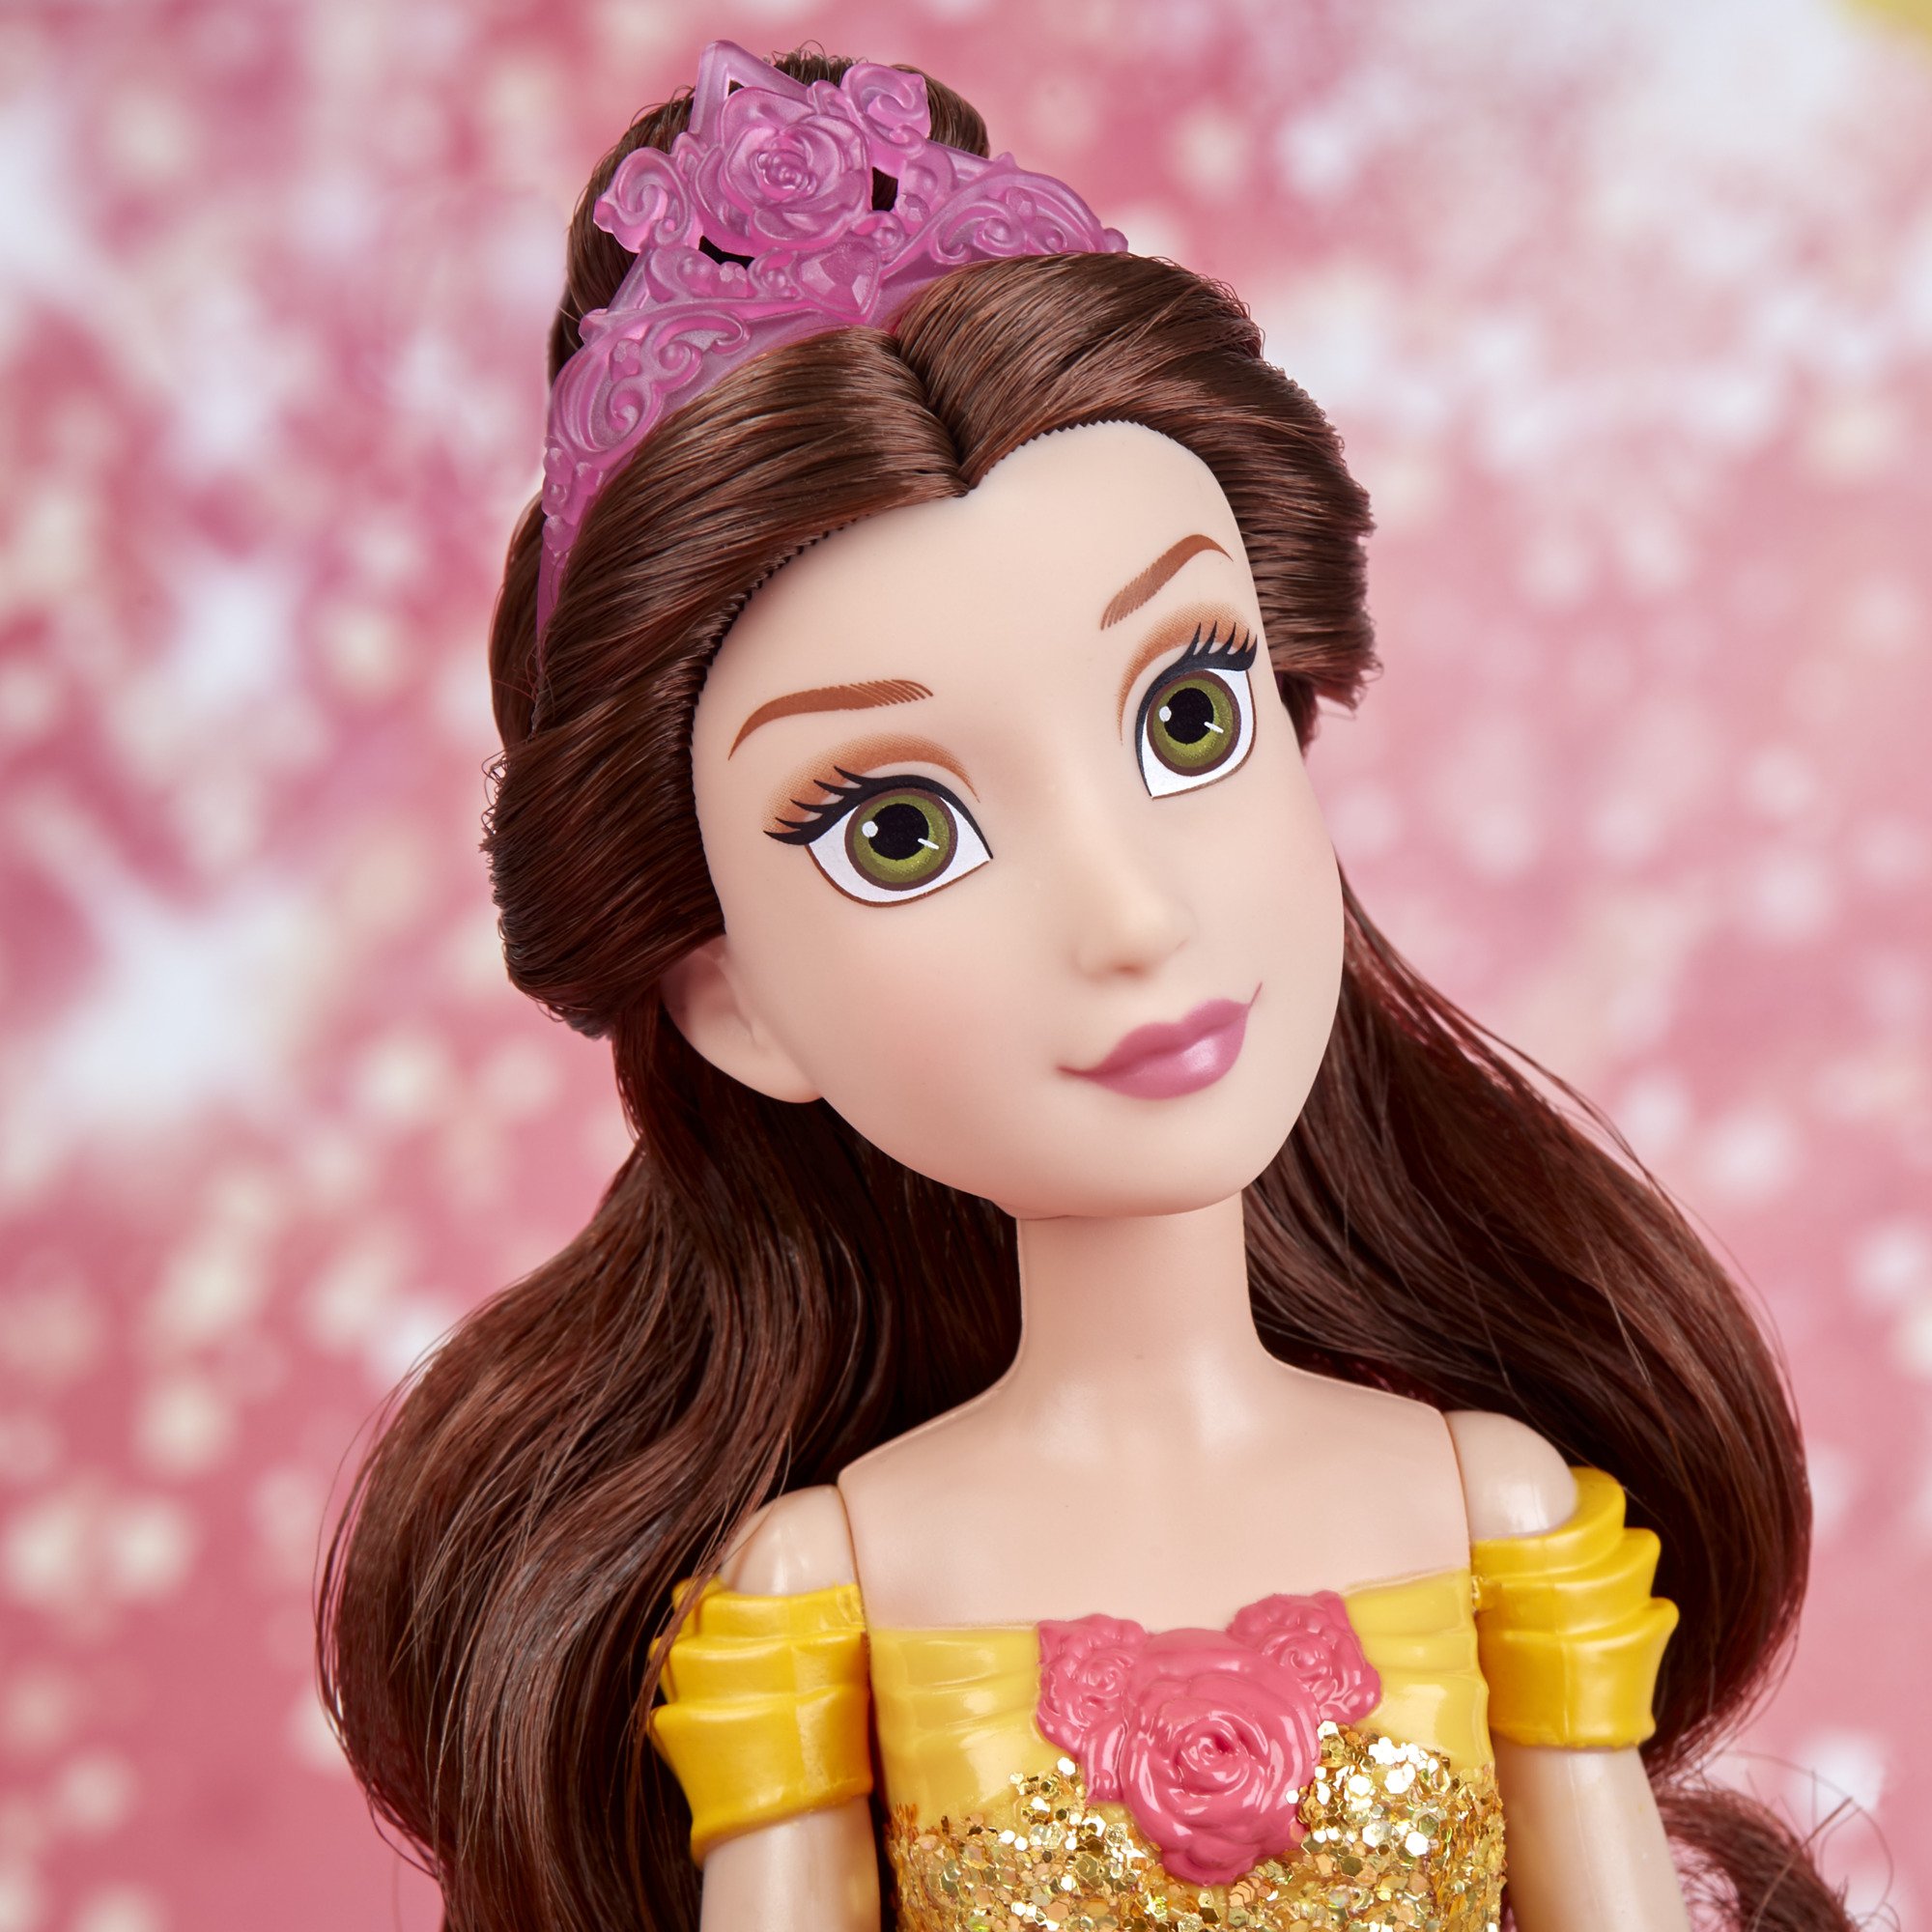 Disney Princess Royal Shimmer Belle with Sparkly Skirt, Includes Tiara and Shoes - image 16 of 16